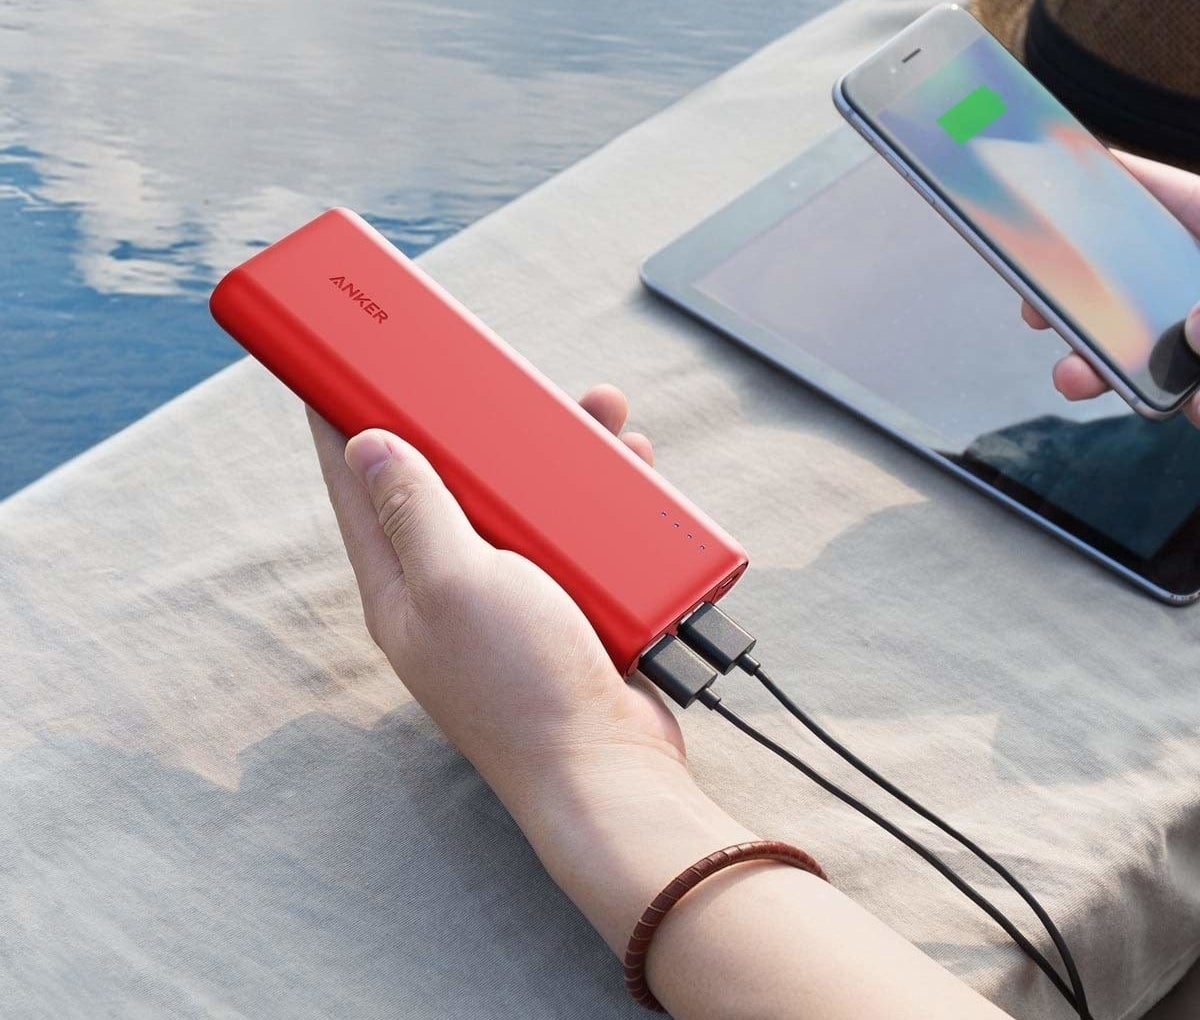 A person holding a slim rectangular power bank charger in their hand